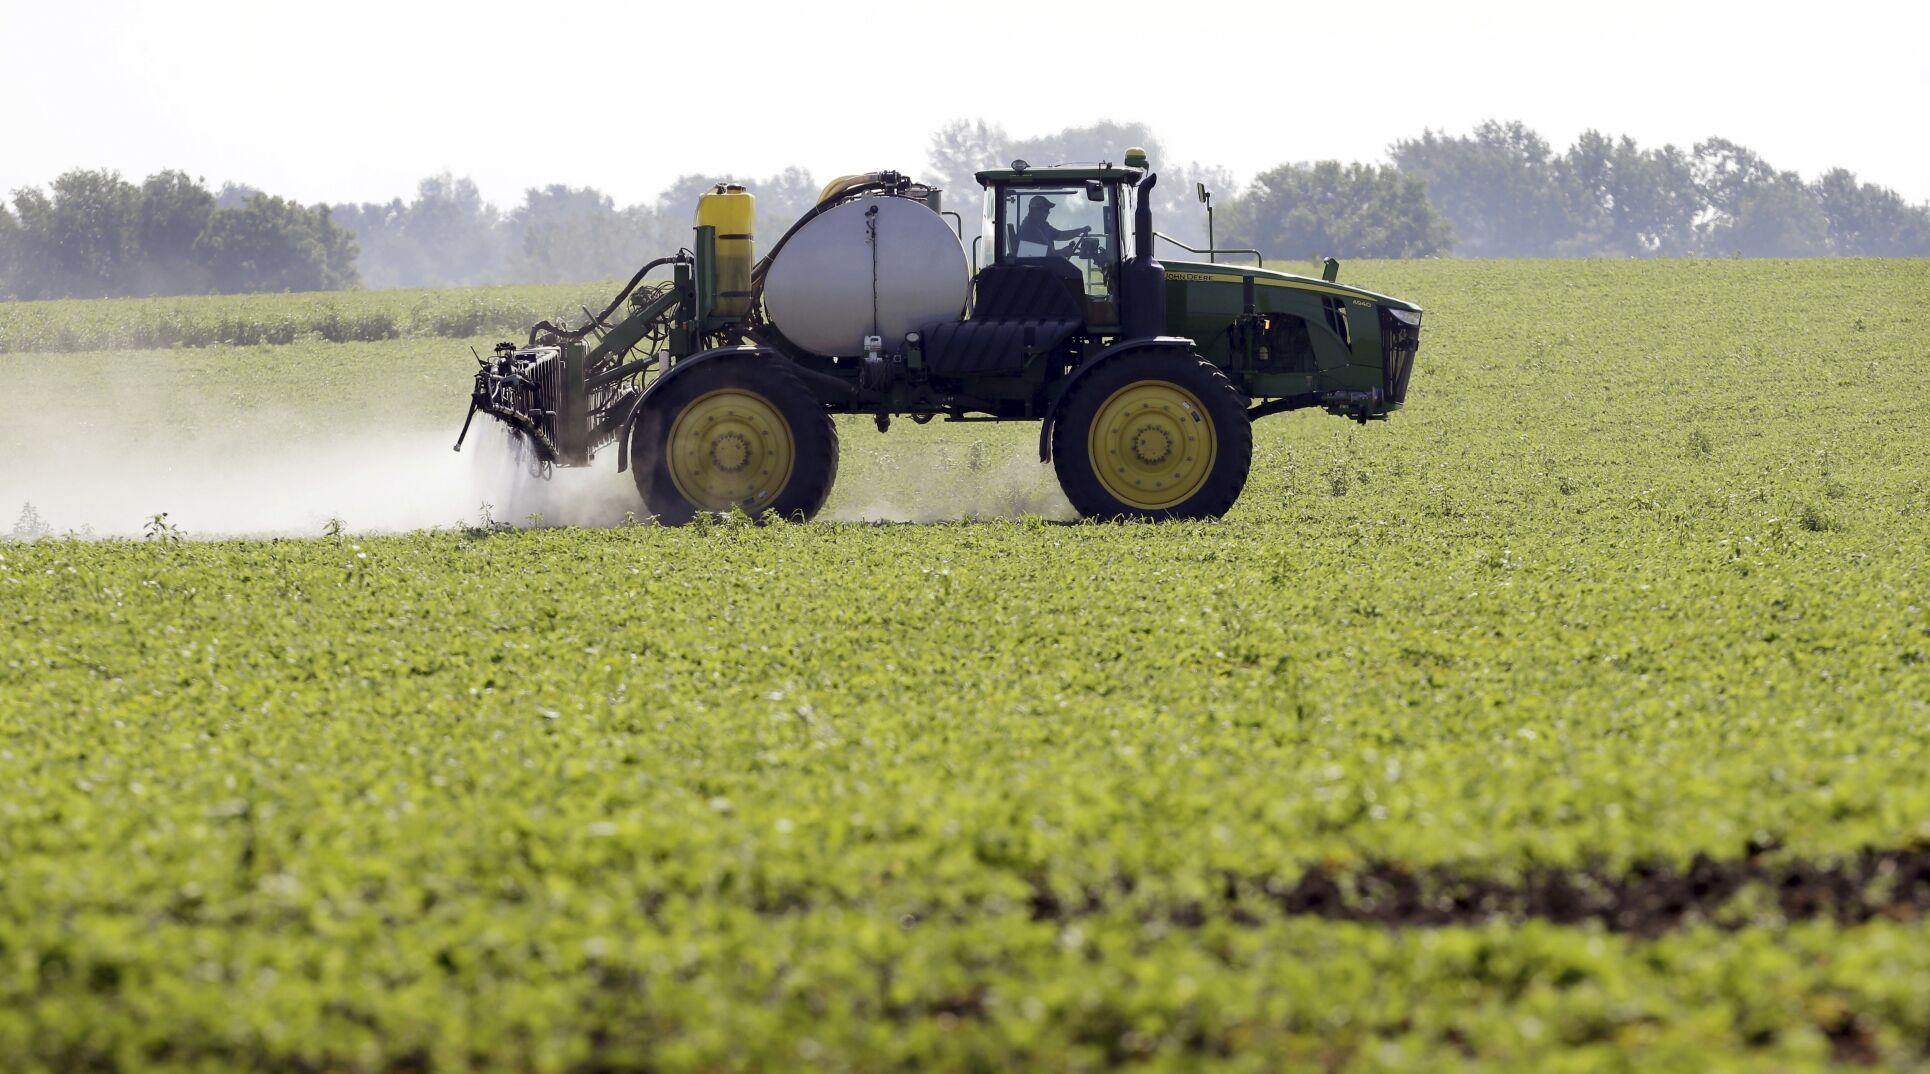 <p>FILE - A soybean field is sprayed in Iowa, July 11, 2013. The maker of a popular weedkiller is turning to lawmakers in key states to try to squelch legal claims that it failed to warn about cancer risks. (AP Photo/Charlie Neibergall, File)</p>   PHOTO CREDIT: Charlie Neibergall 